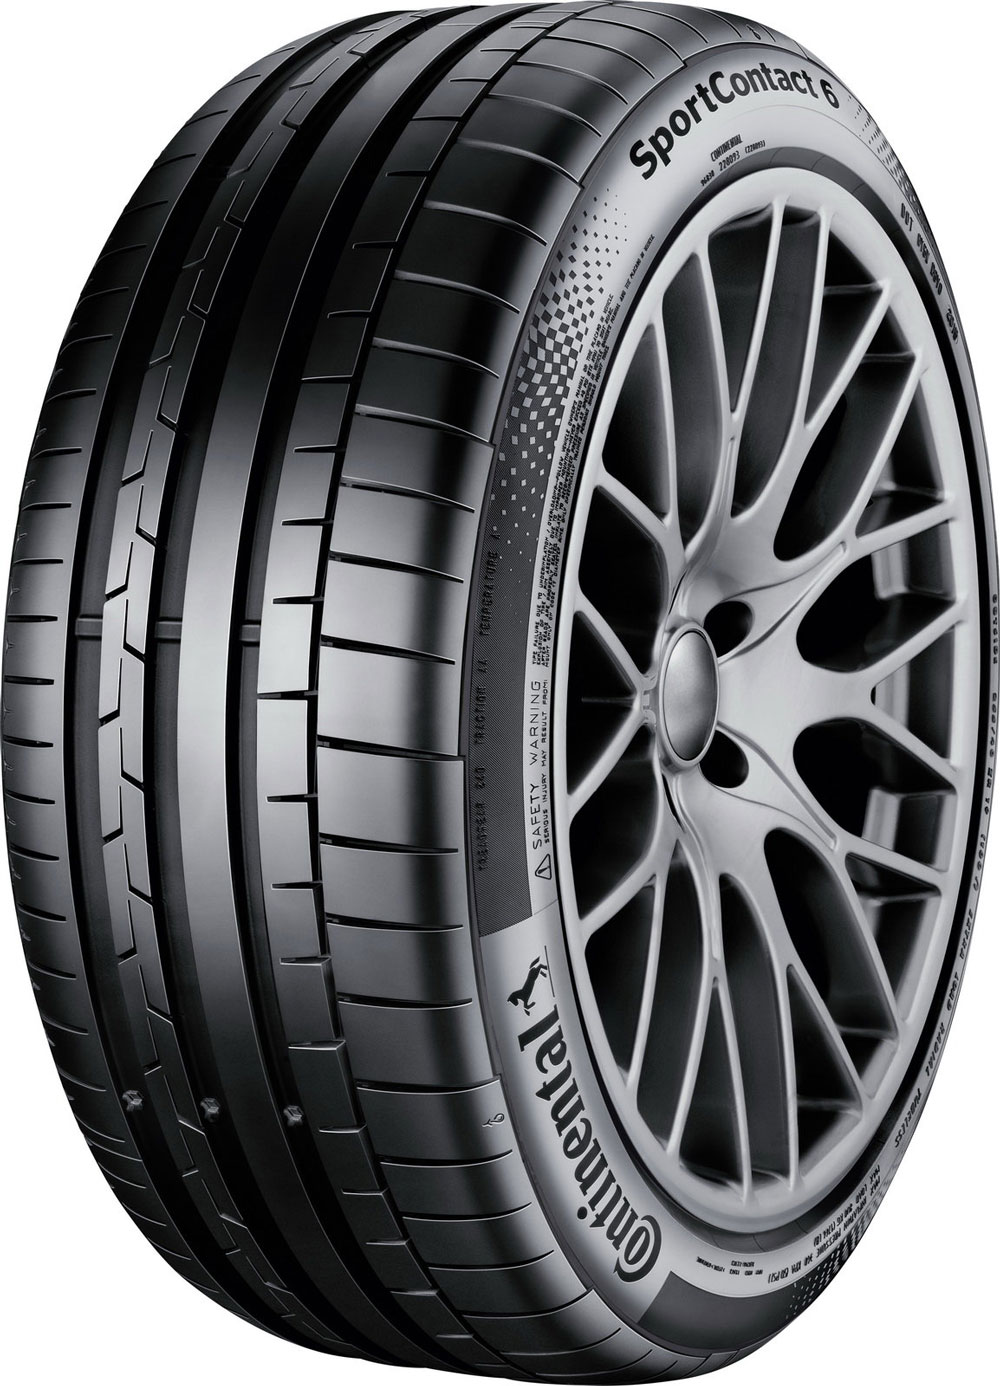 Гуми за кола CONTINENTAL SPORT CONTACT 6 XL 325/30 R21 108Y